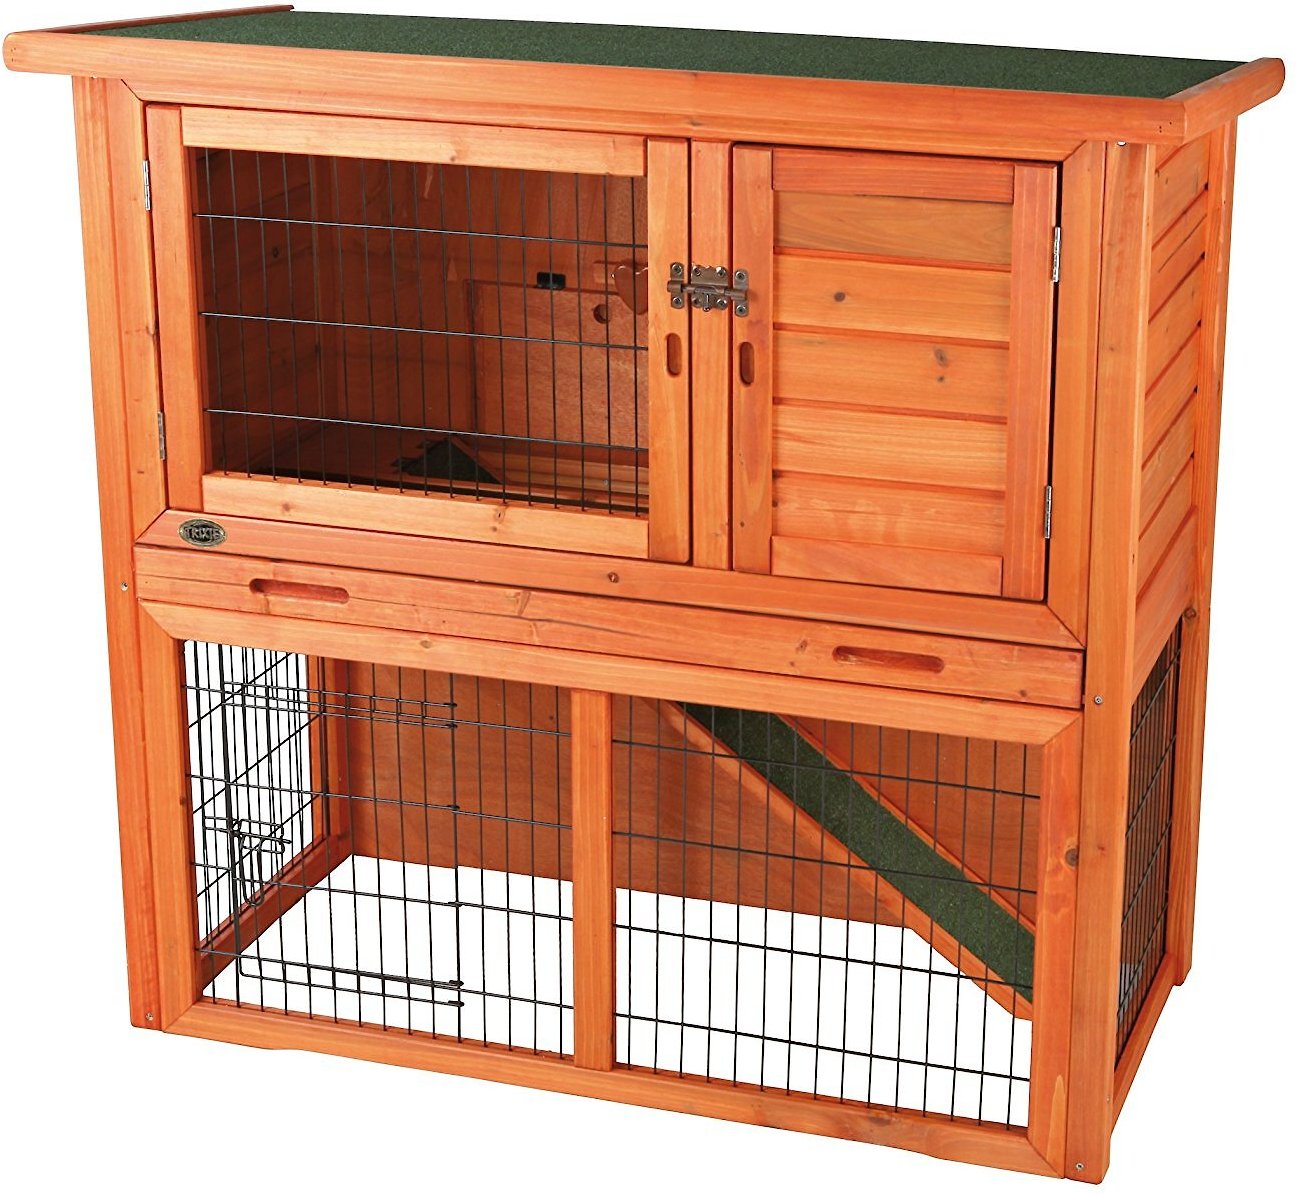 TRIXIE Natura Rabbit Hutch with Sloped Roof, Glazed Pine, Small 